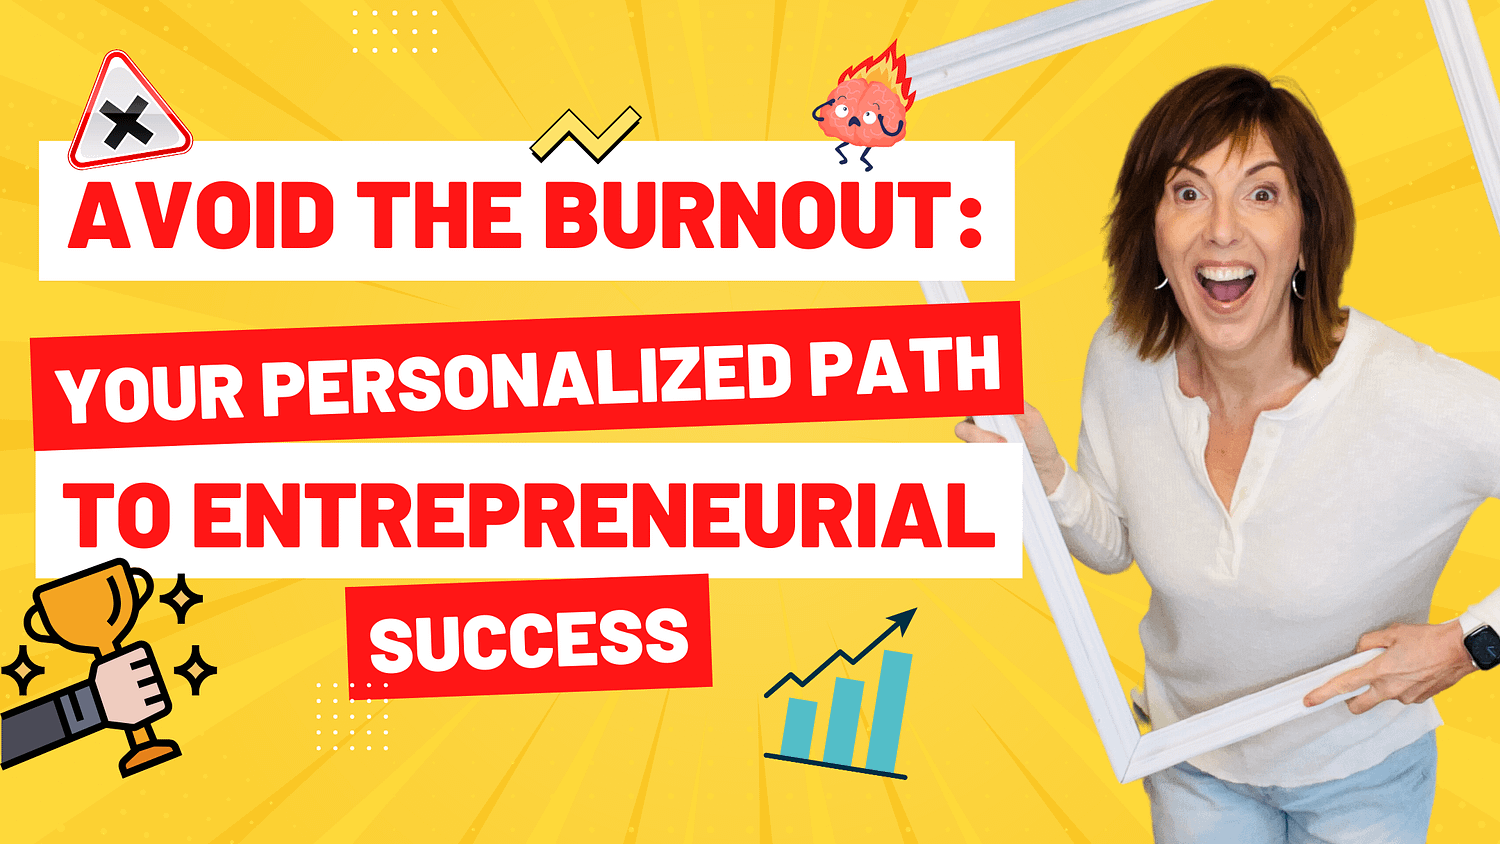 Avoid The Burnout: Your Personalized Path to Entrepreneurial Success